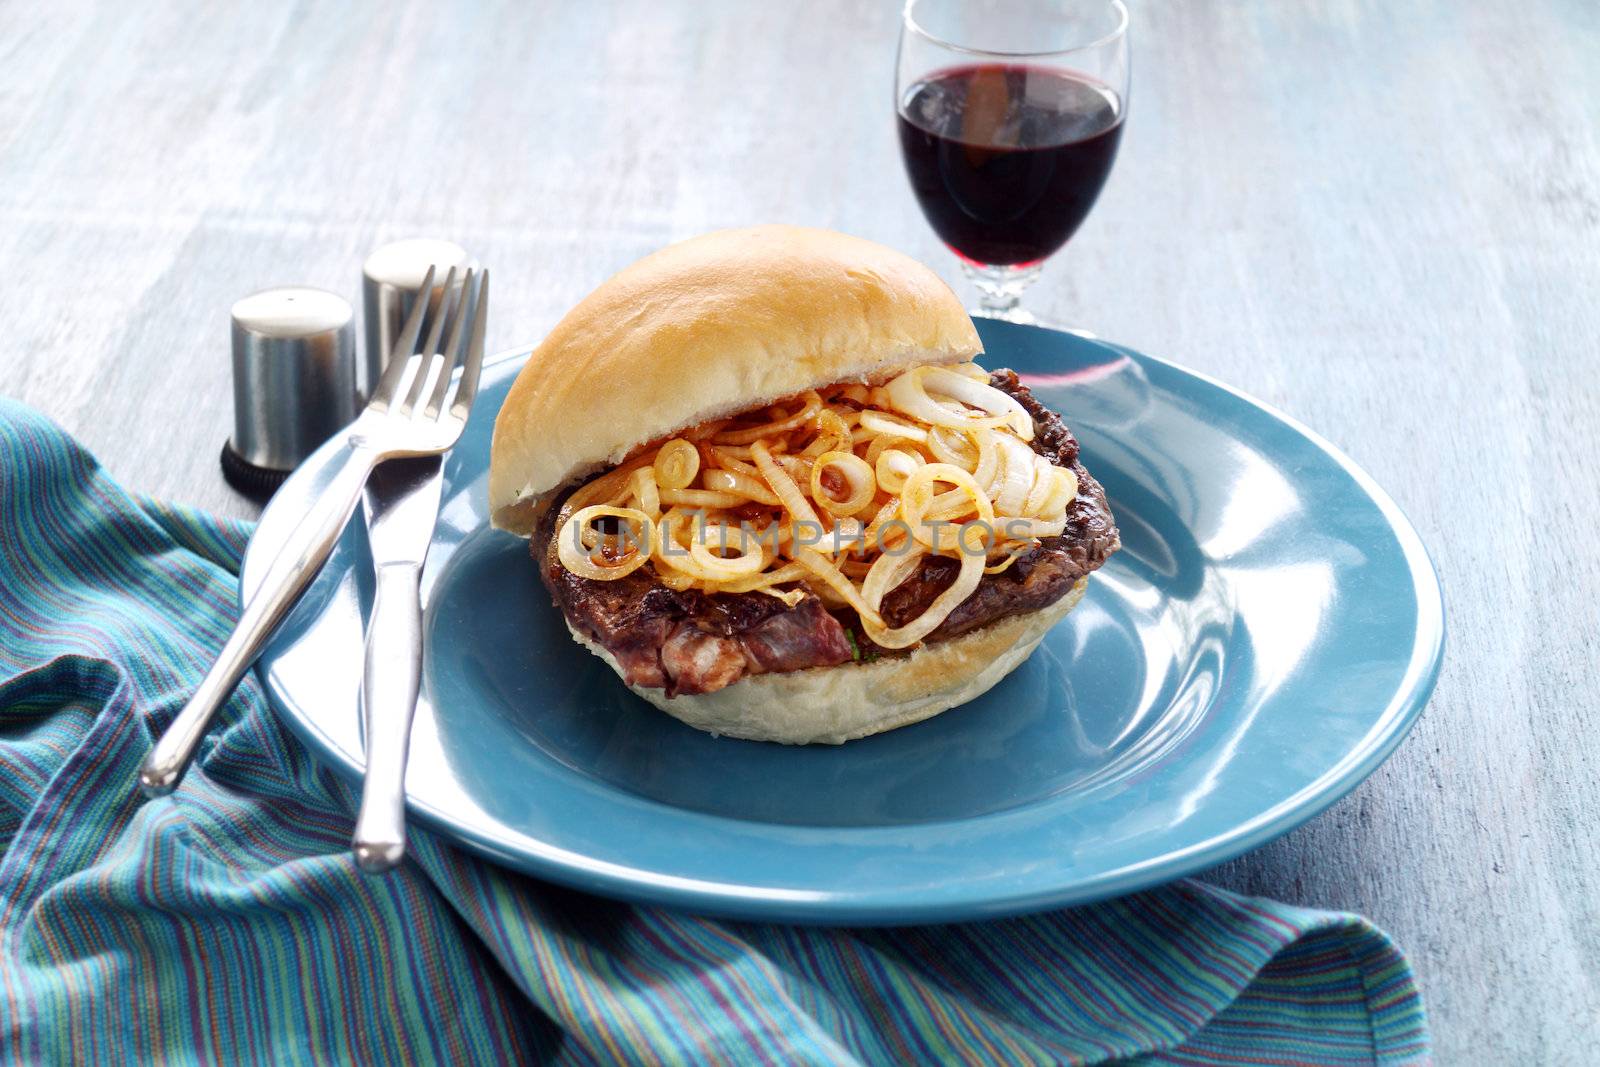 Delicious steak burger with fried onions ready to serve.